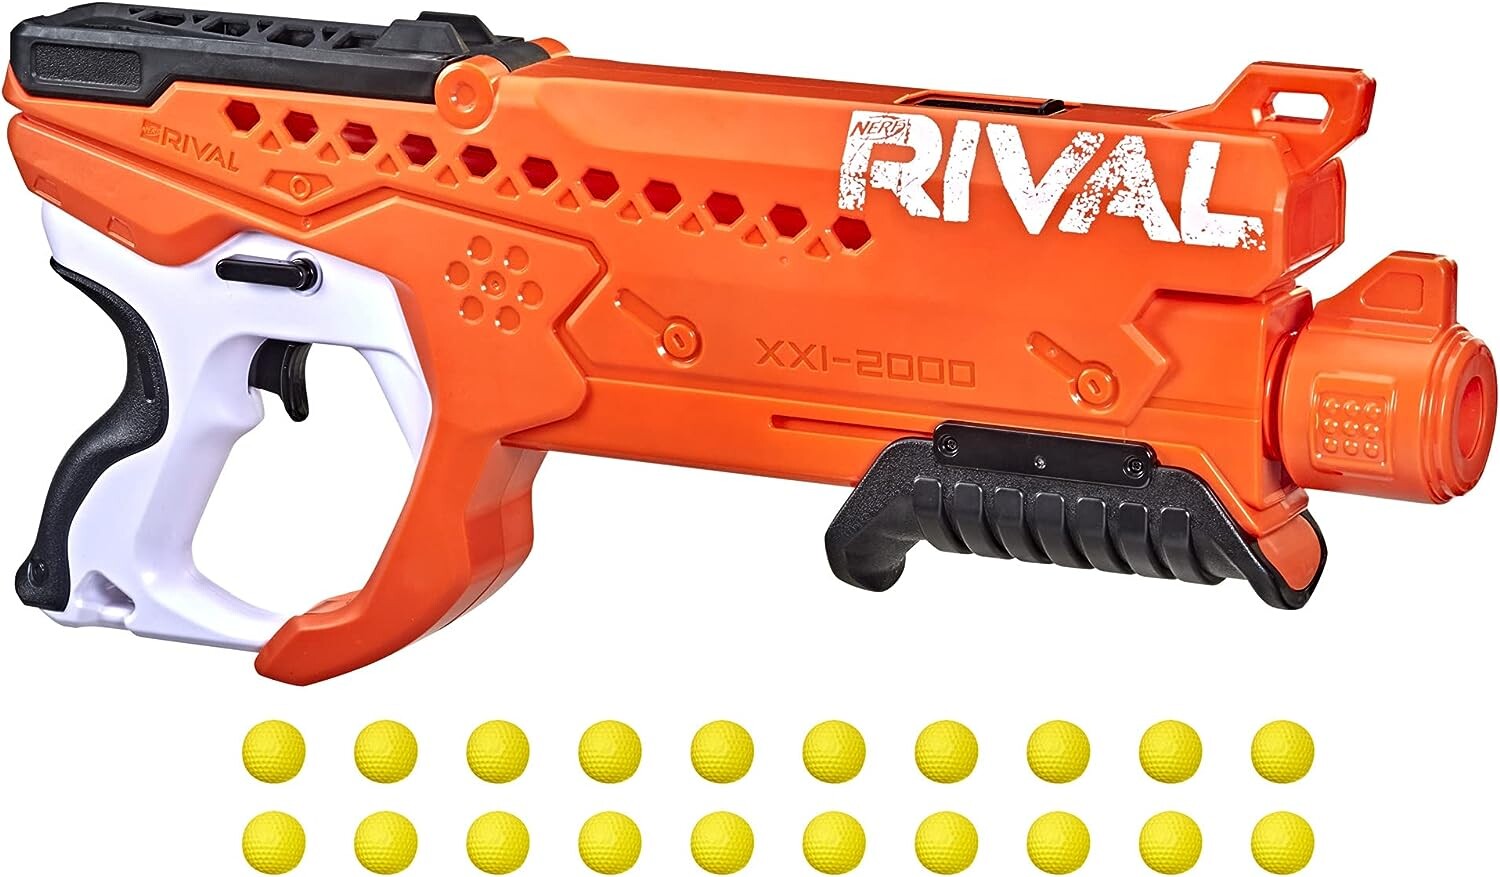 https://content.pearl.fr/media/cache/default/article_ultralarge_high_nocrop/shared/images/articles/T/TG2/blaster-nerf-rival-helix-xxi-2000-curve-shot-ref_TG2734_4.jpg